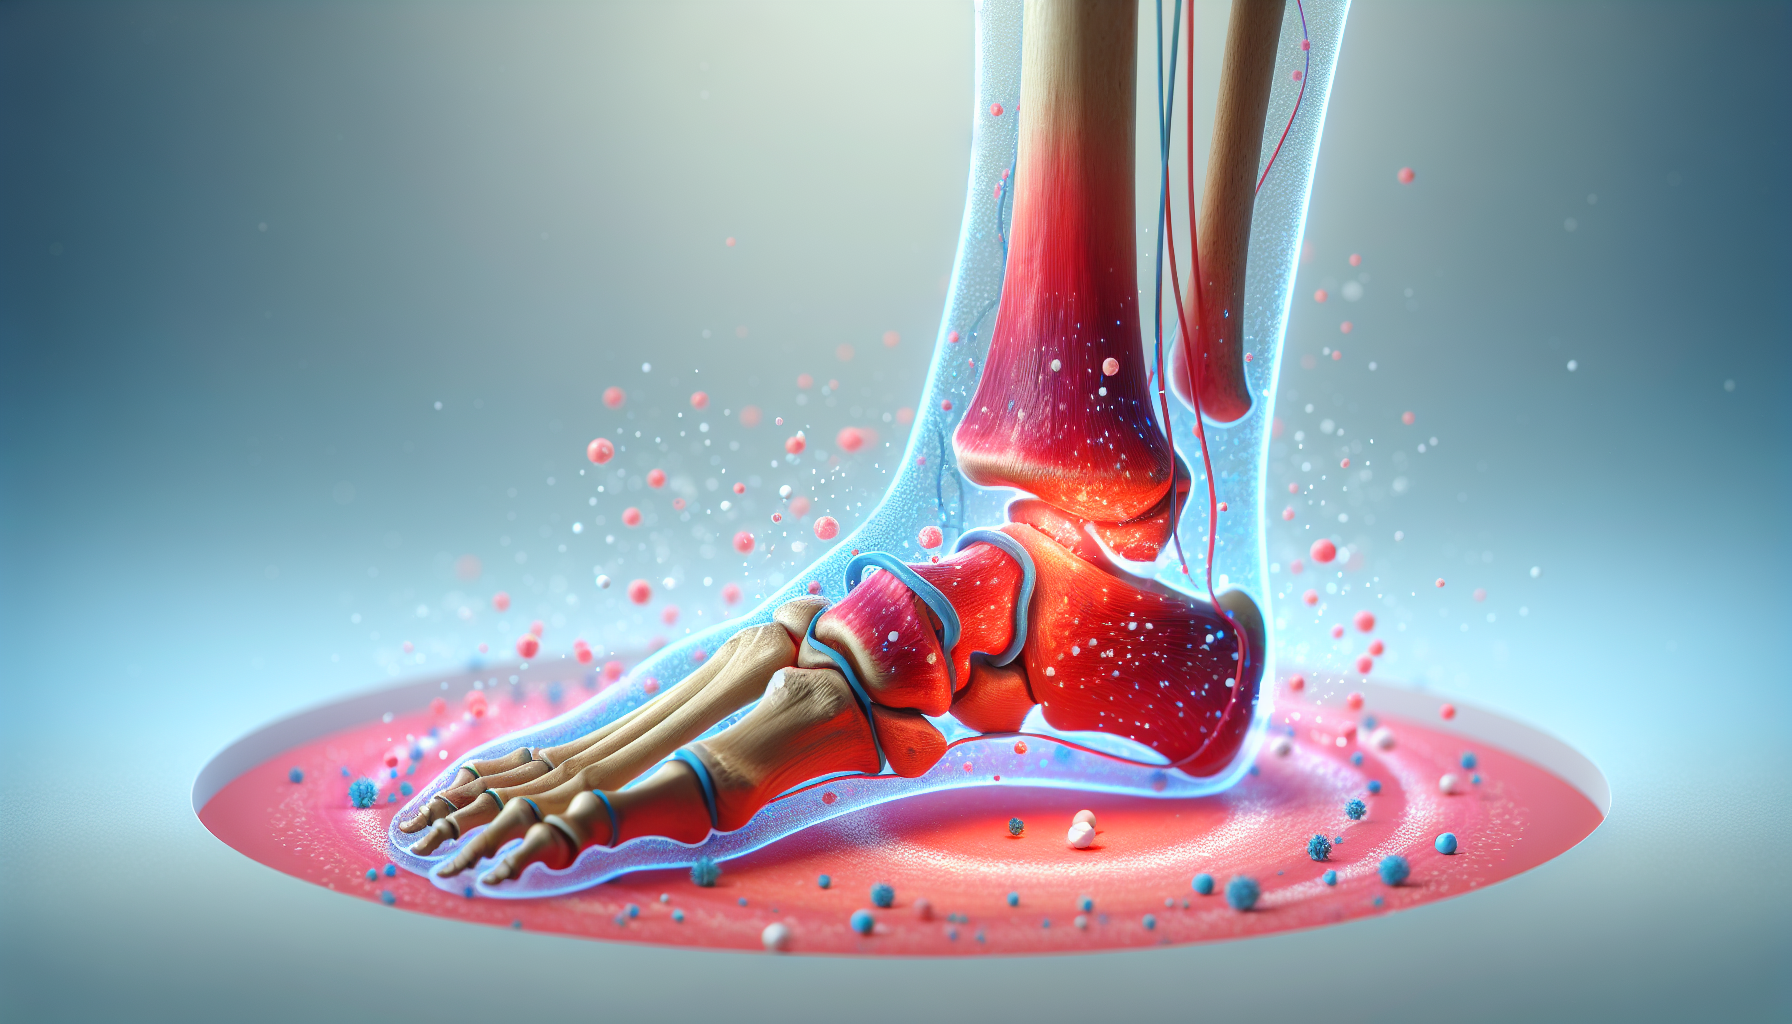 Illustration of inflamed ankle joint affected by arthritis